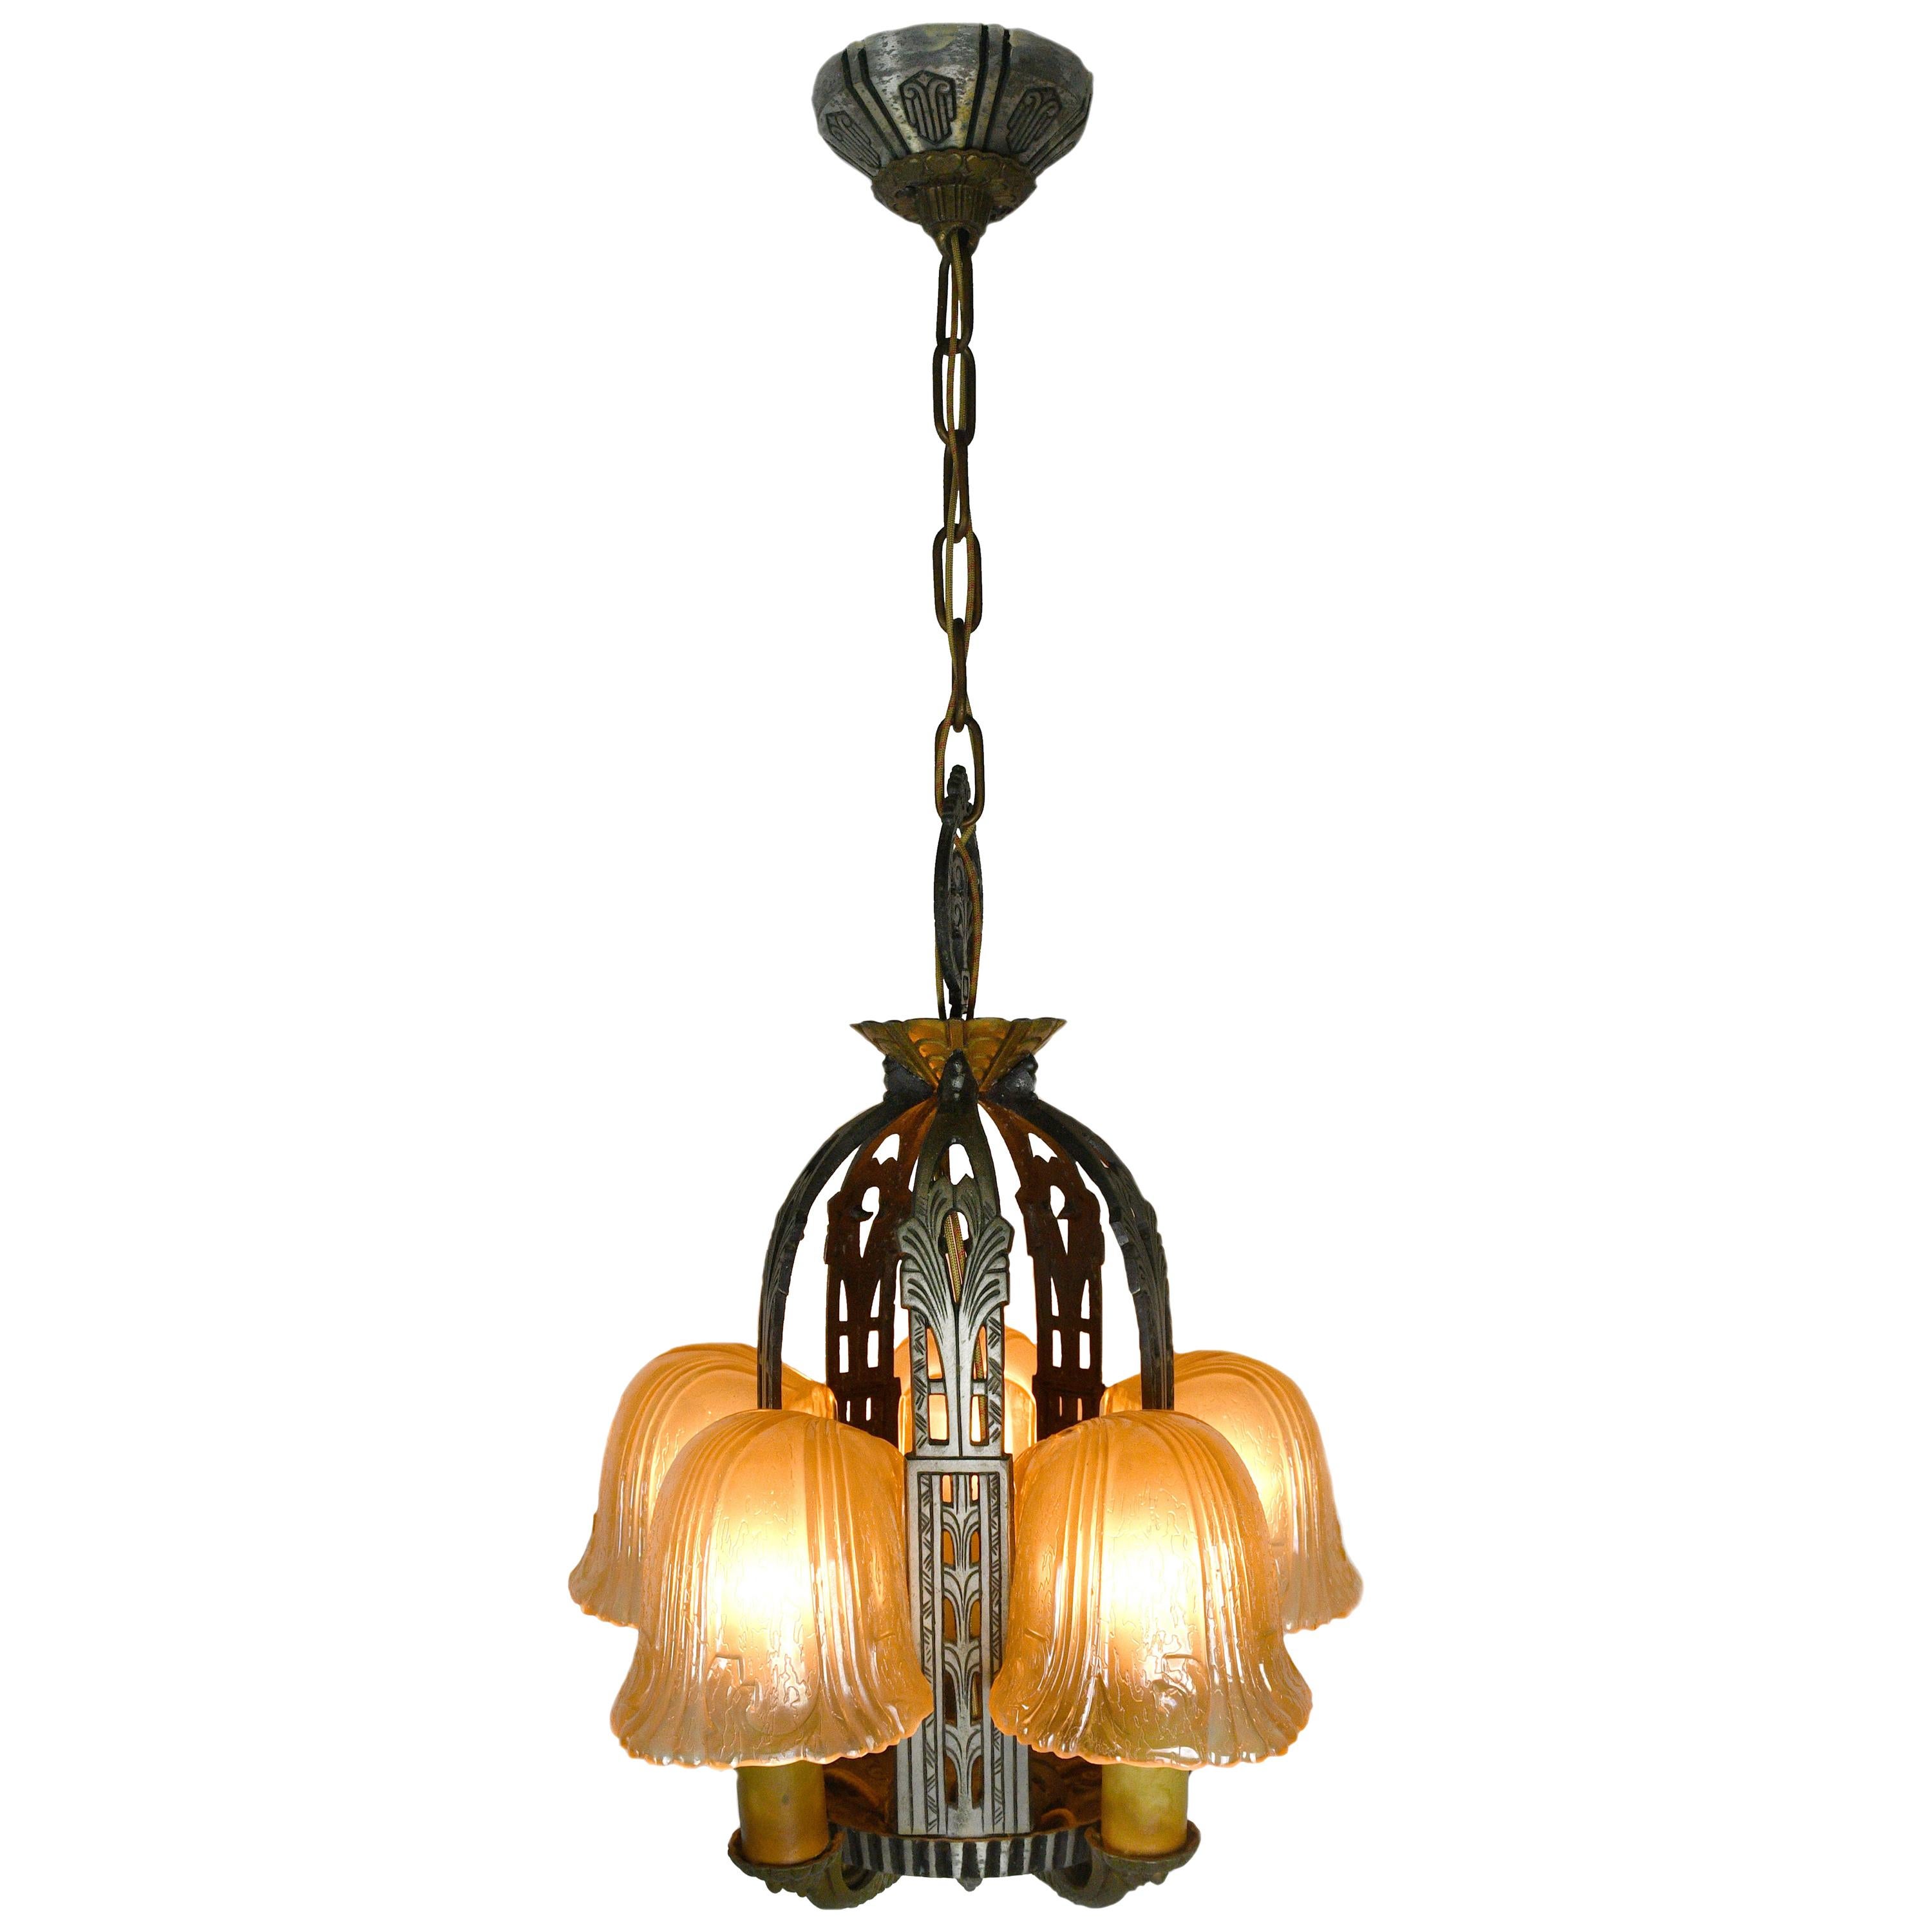 Riddle Art Deco 5 Candle Slip Shade Chandelier For Sale